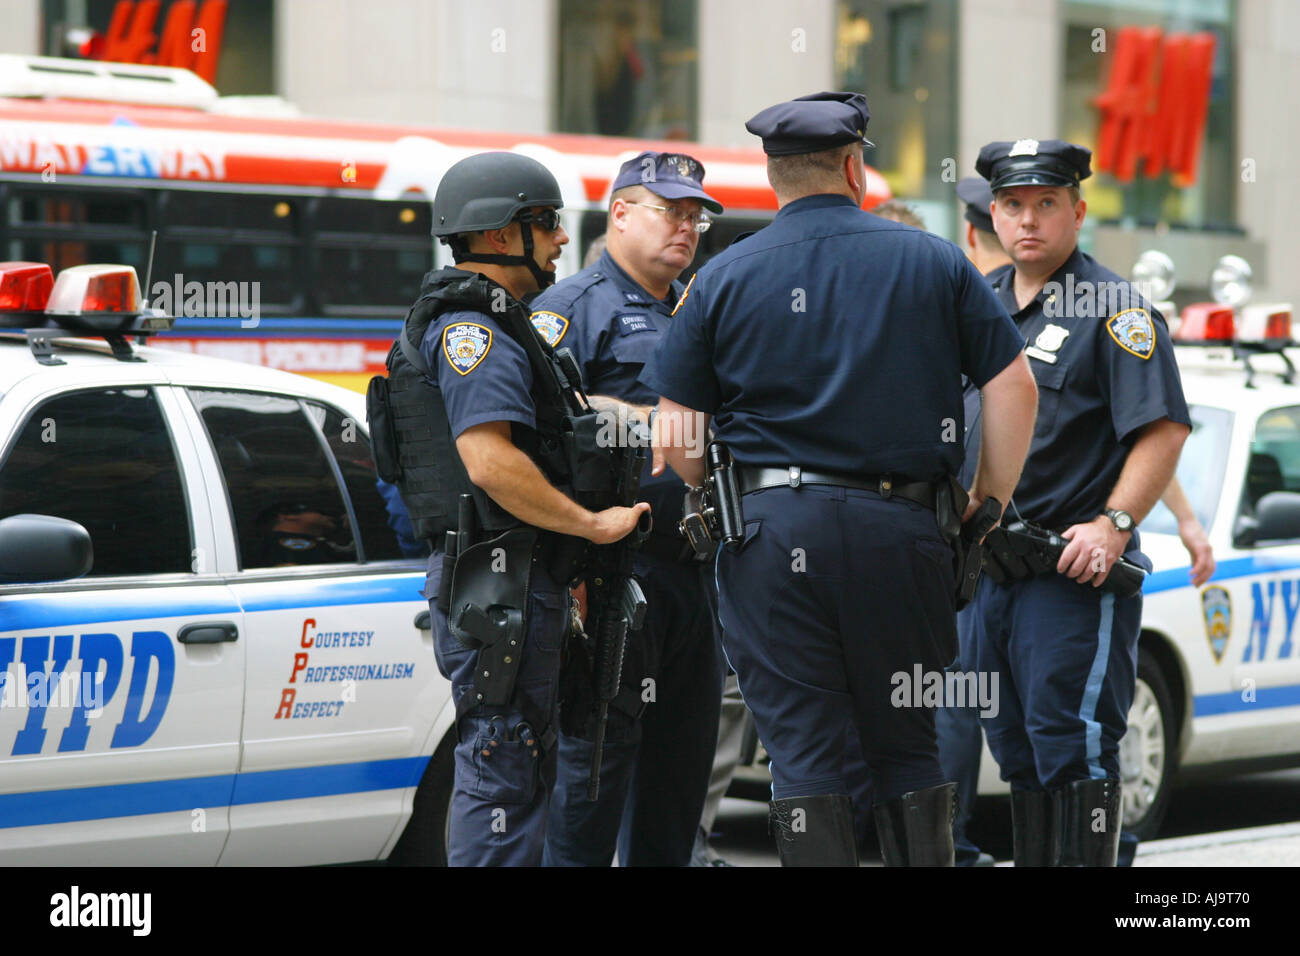 NYPD police in uniform in front of patrol car NYC Stock Photo - Alamy